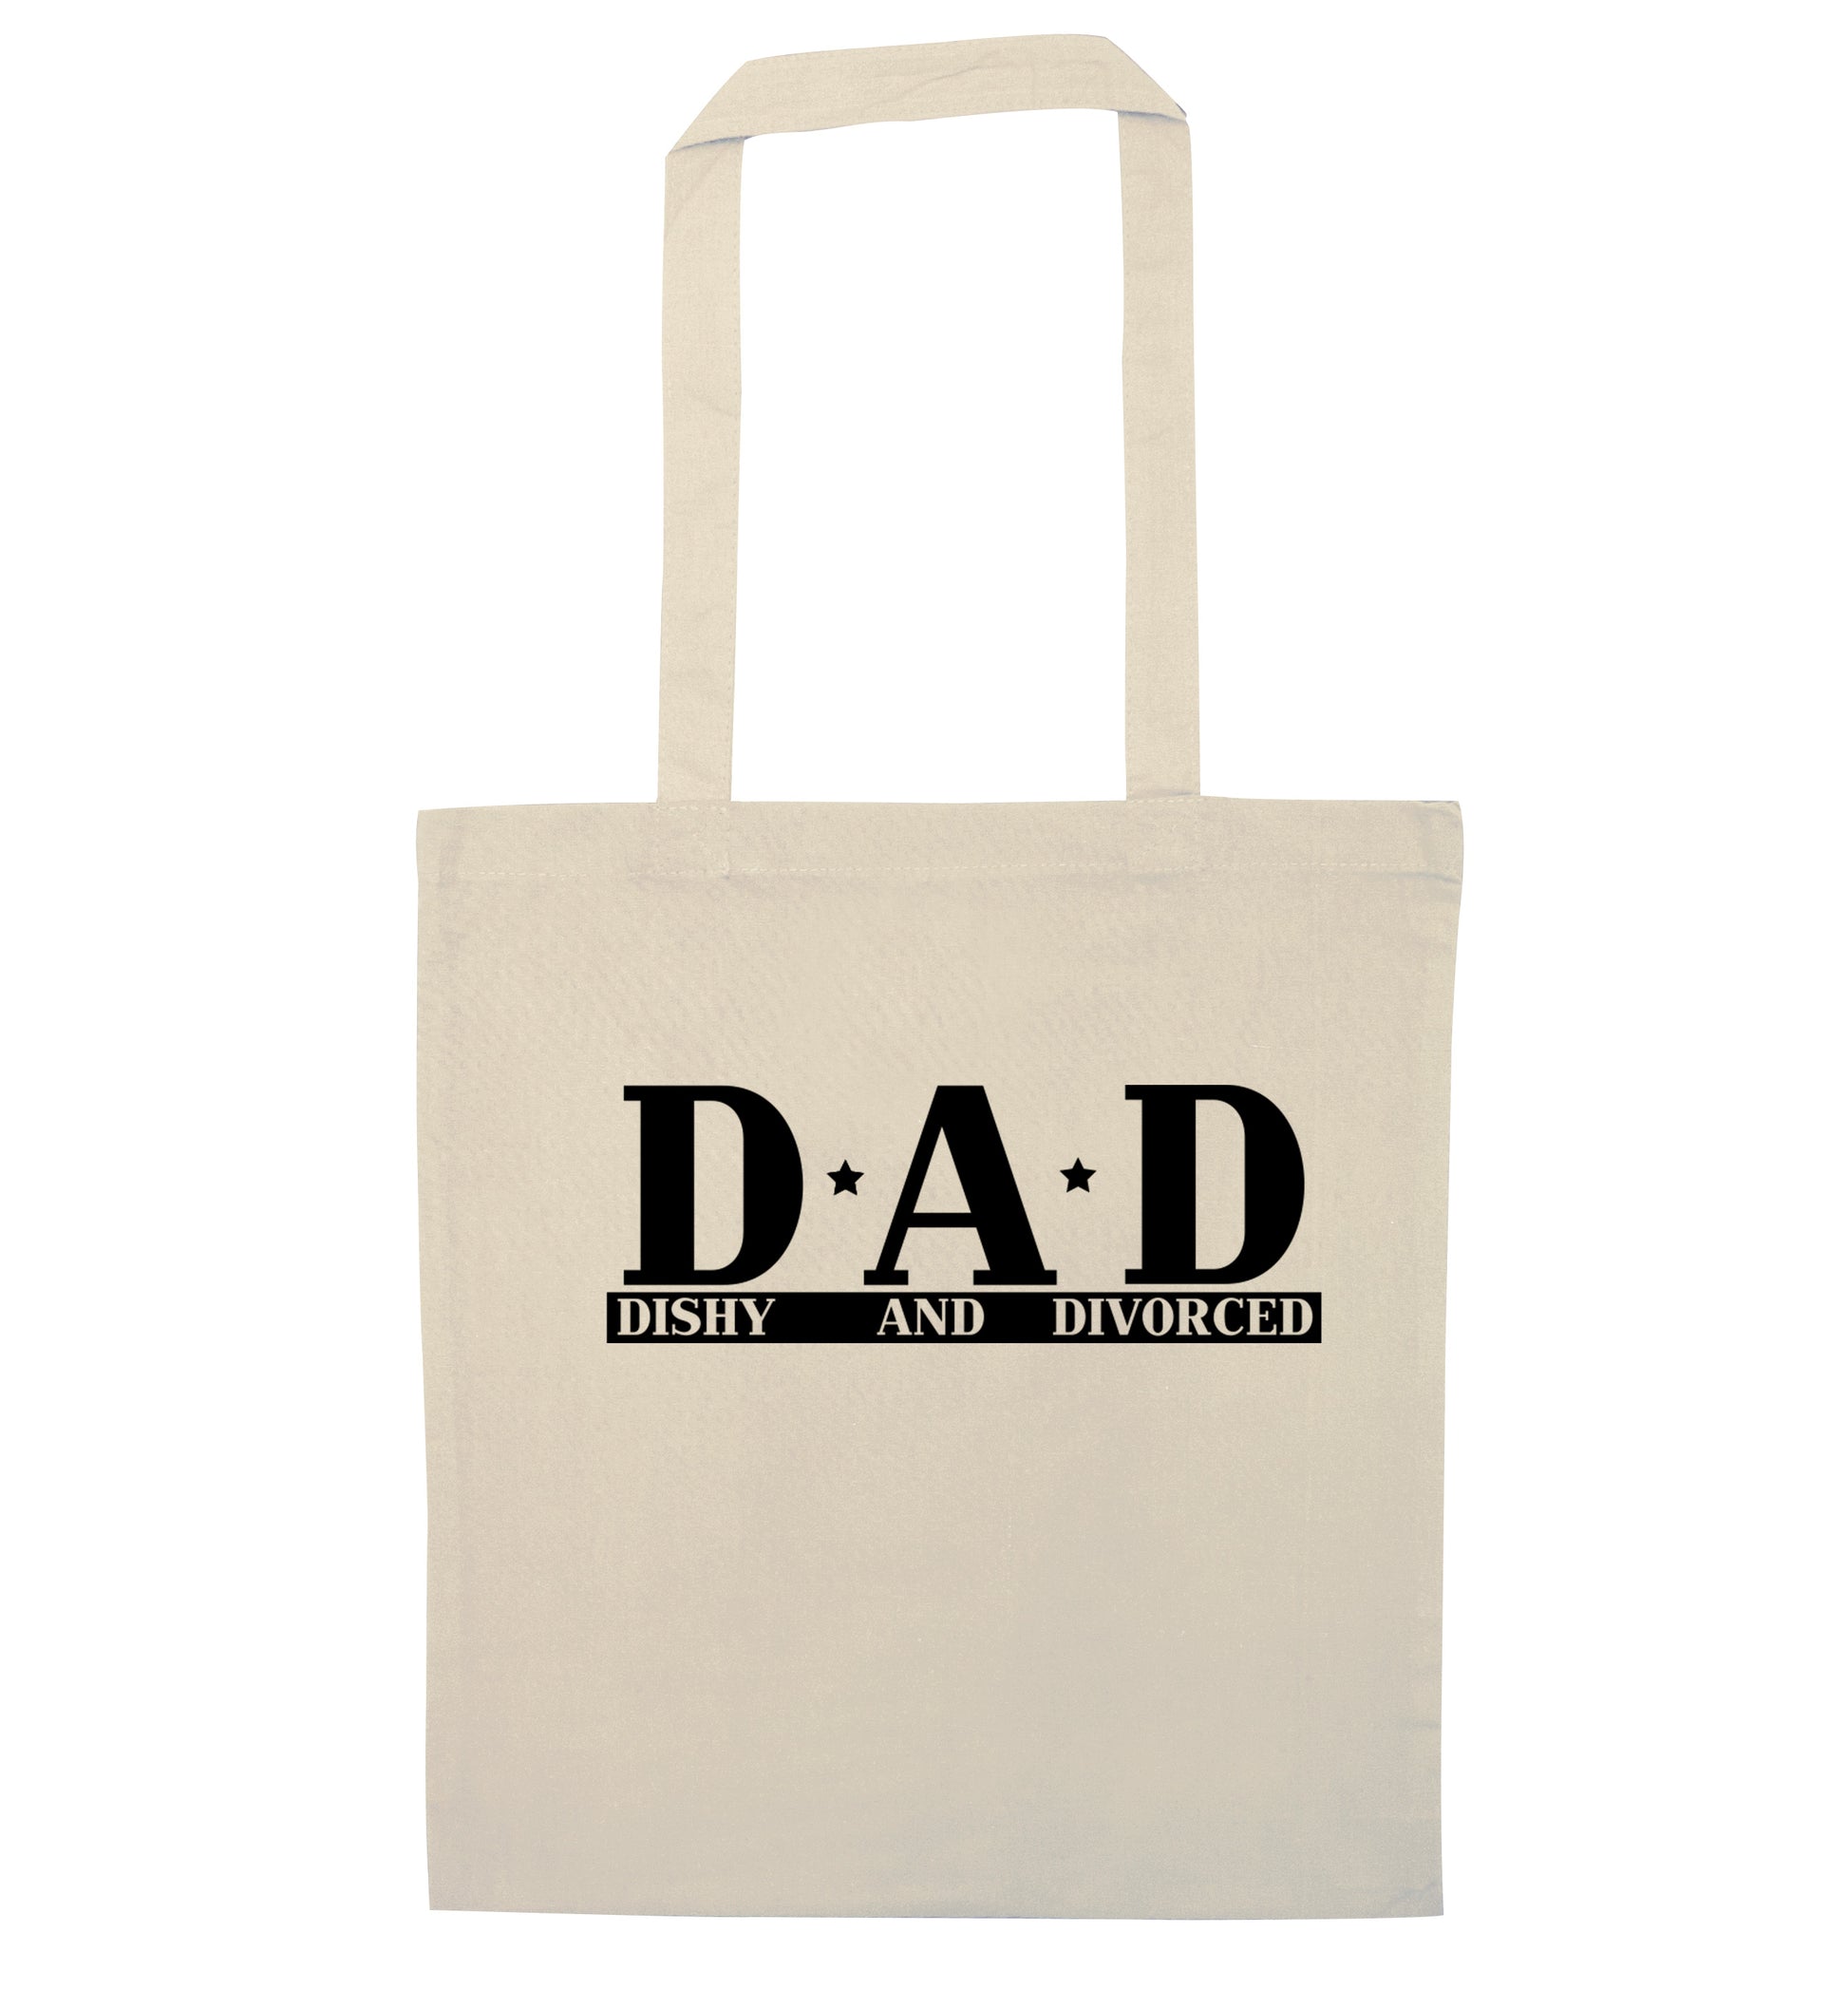 D.A.D meaning Dishy and Divorced natural tote bag